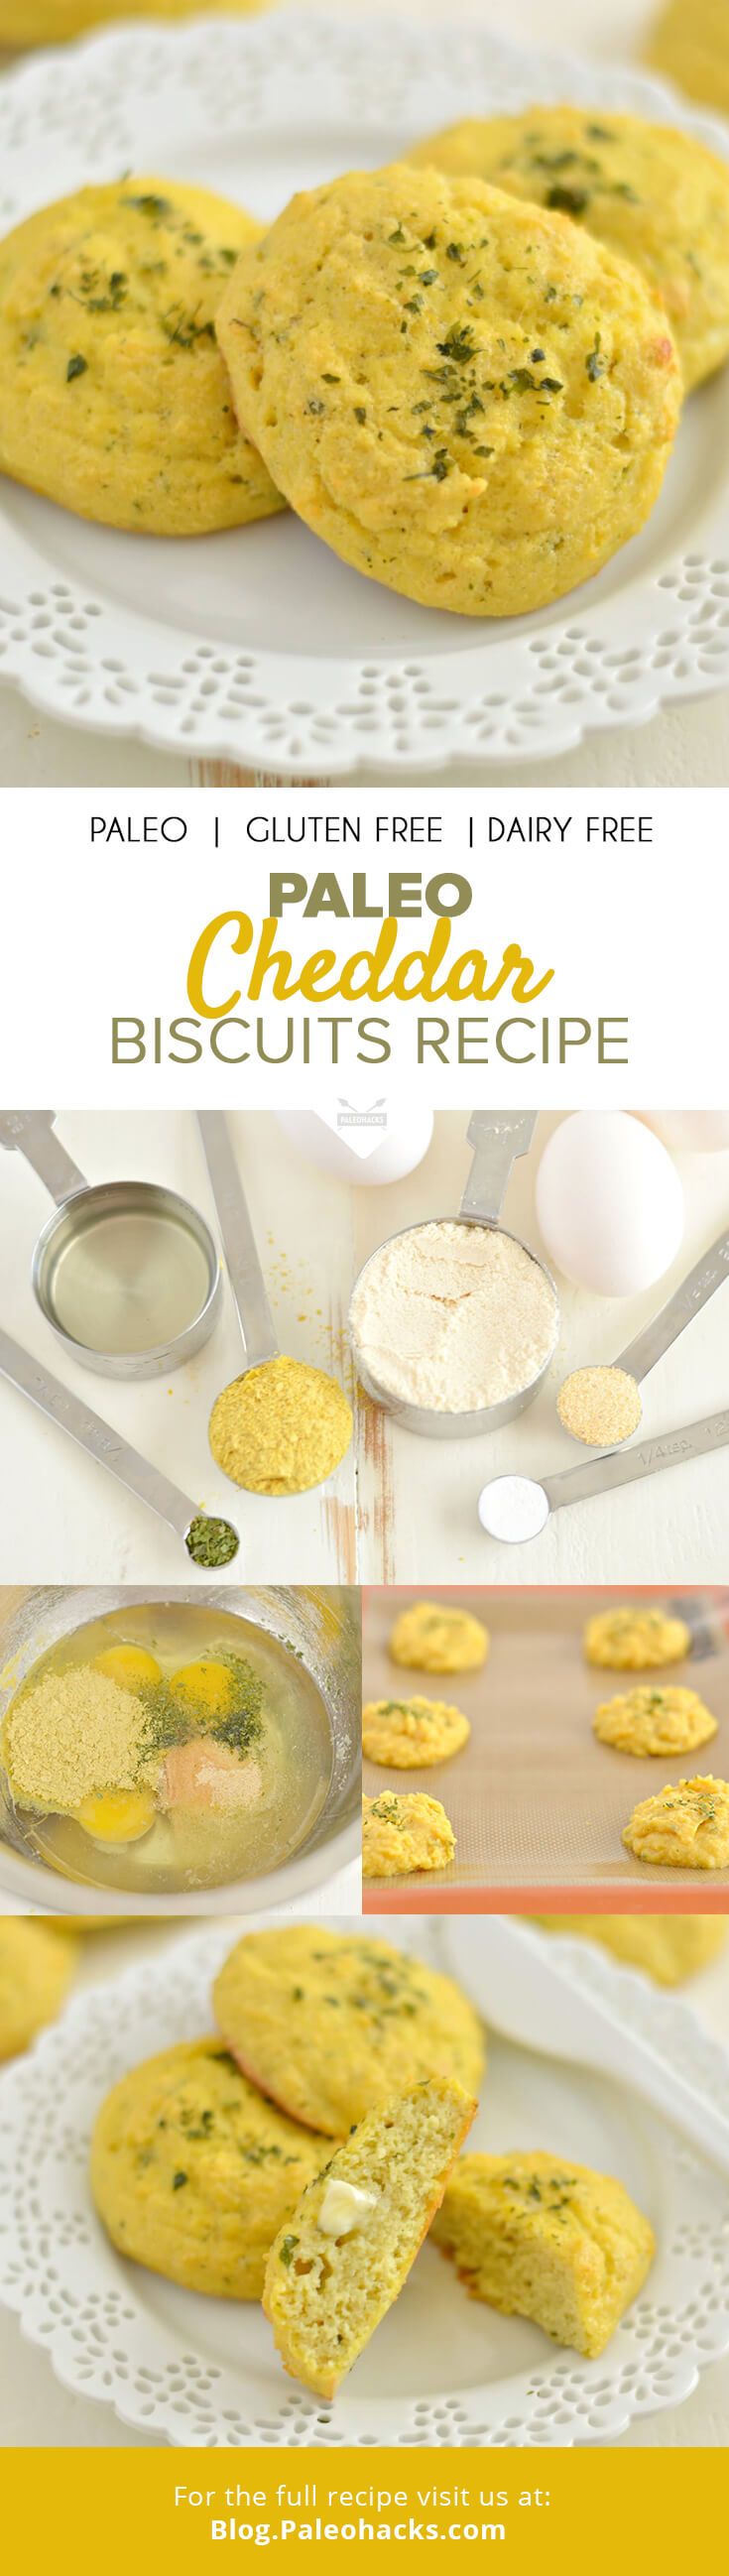 cheesy biscuits pin